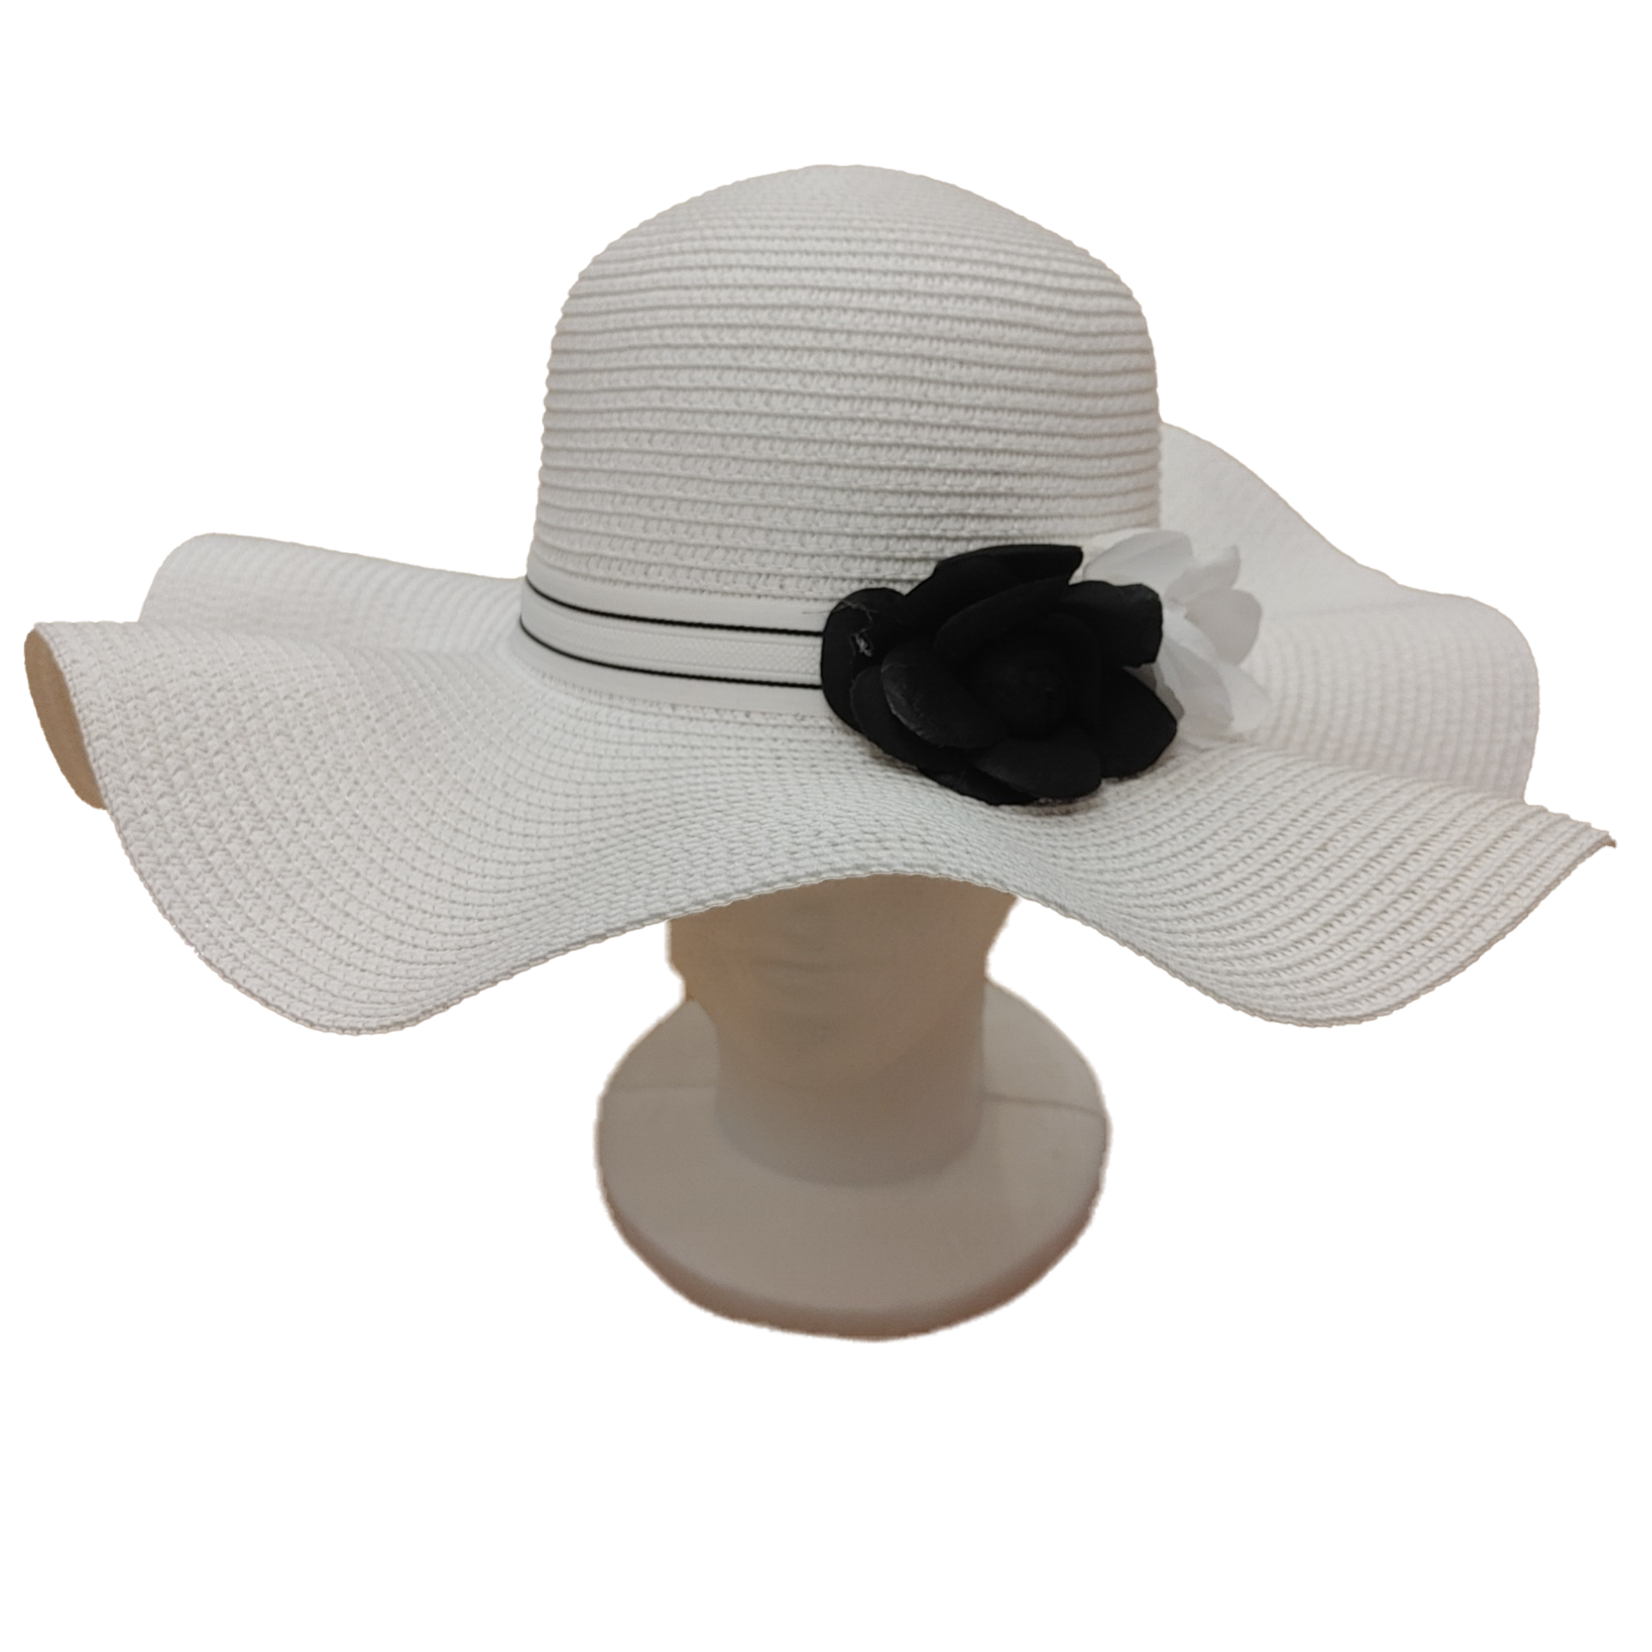 Picabo Picabo summer shade hat with flower